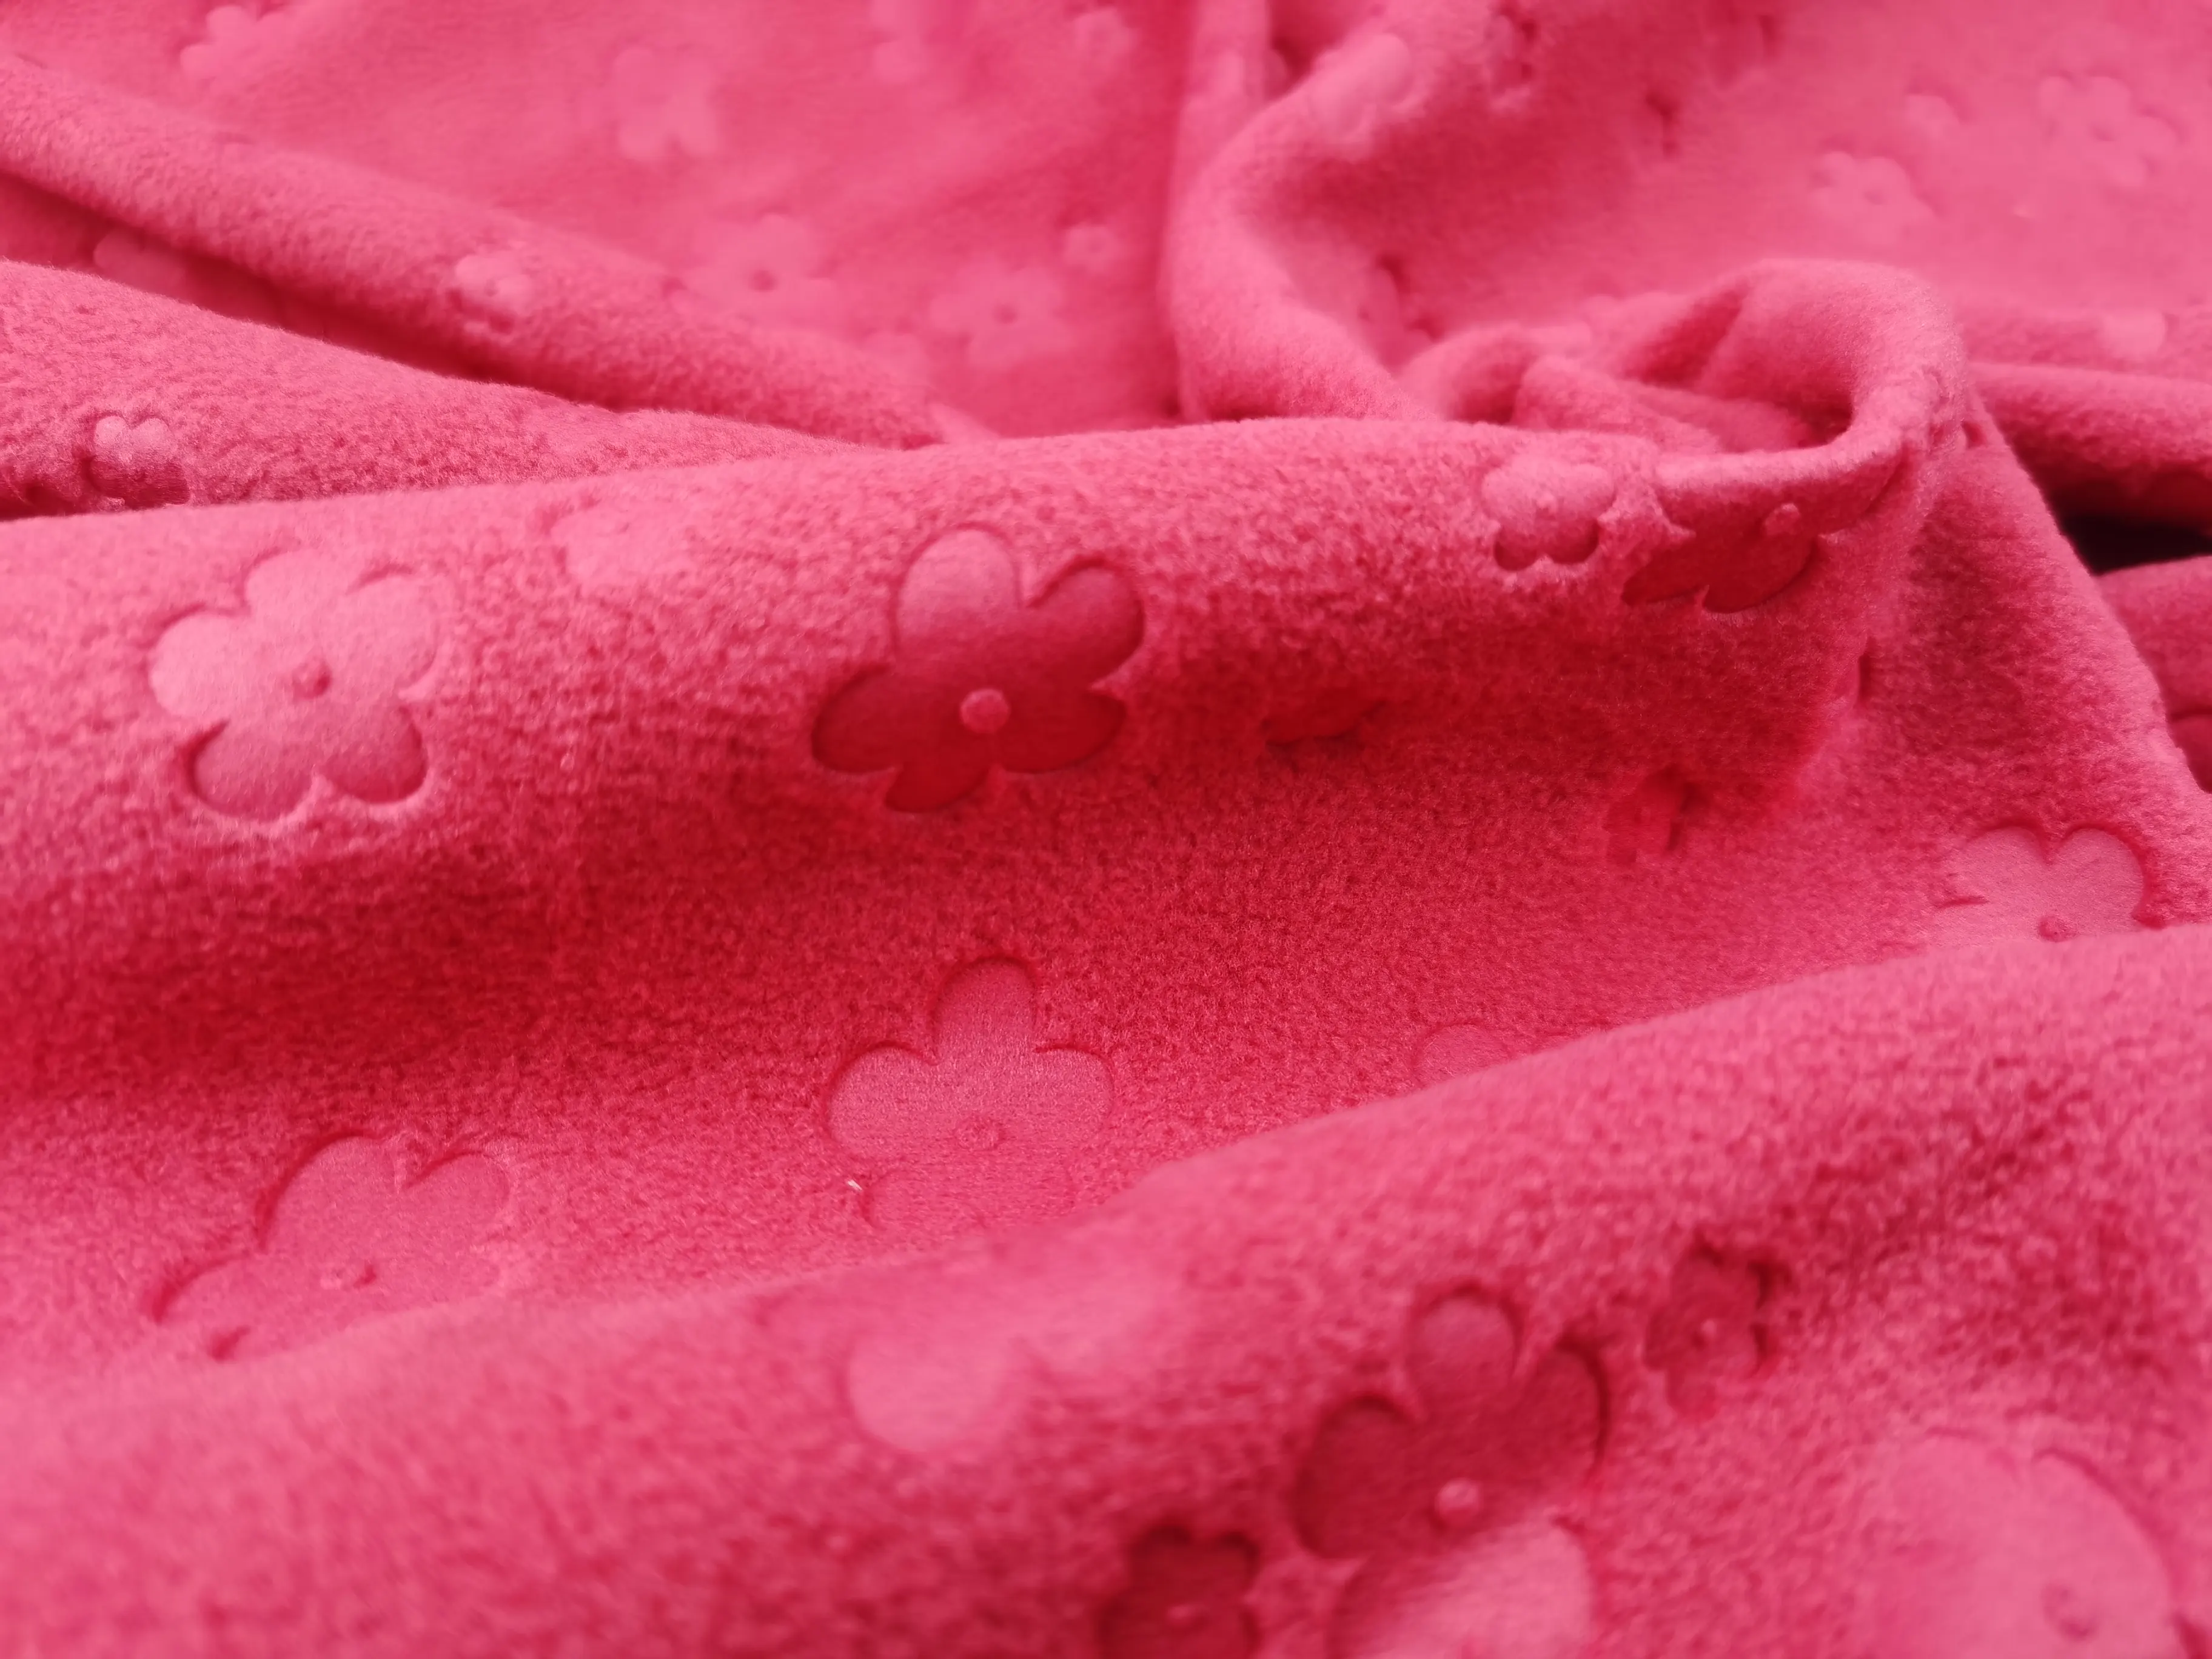 FREE SAMPLE Wholesale 100% Polyester Embossed Velvet Fabric Polar Fleece Fabric Double Brushed for Single Jersey Fabric